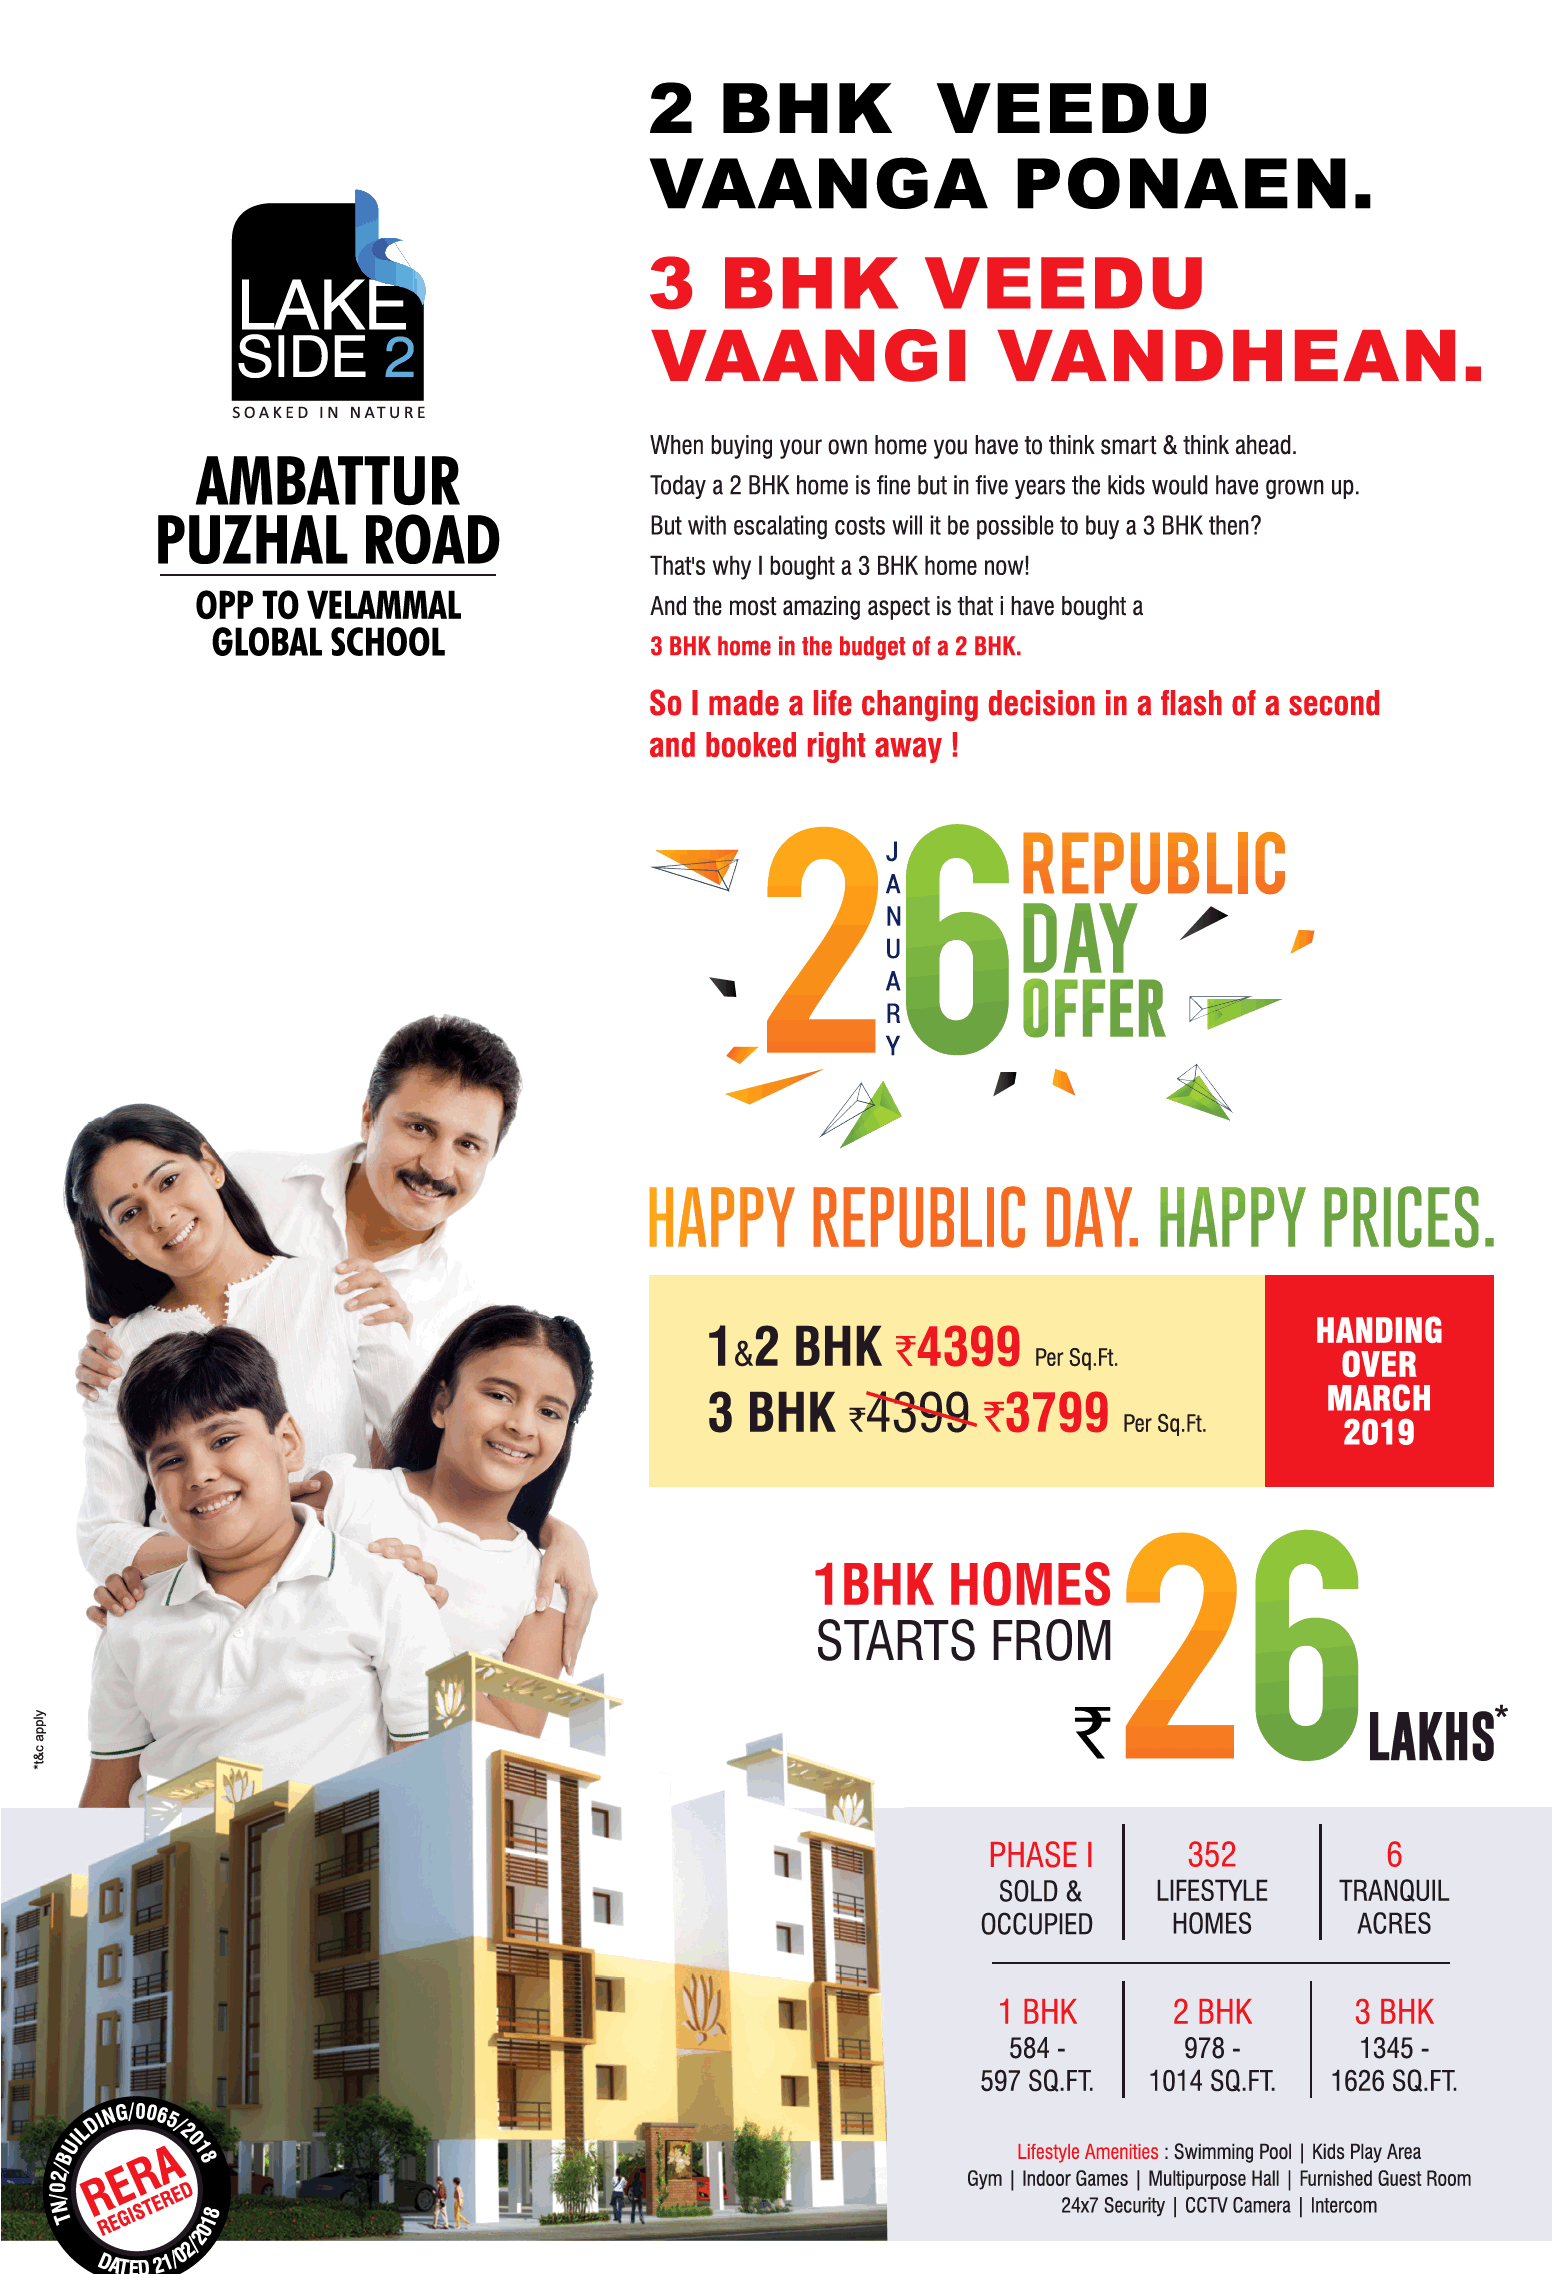 Book 1 bhk homes @ Rs. 26 lakhs at Megh Lake Side 2 in Chennai Update